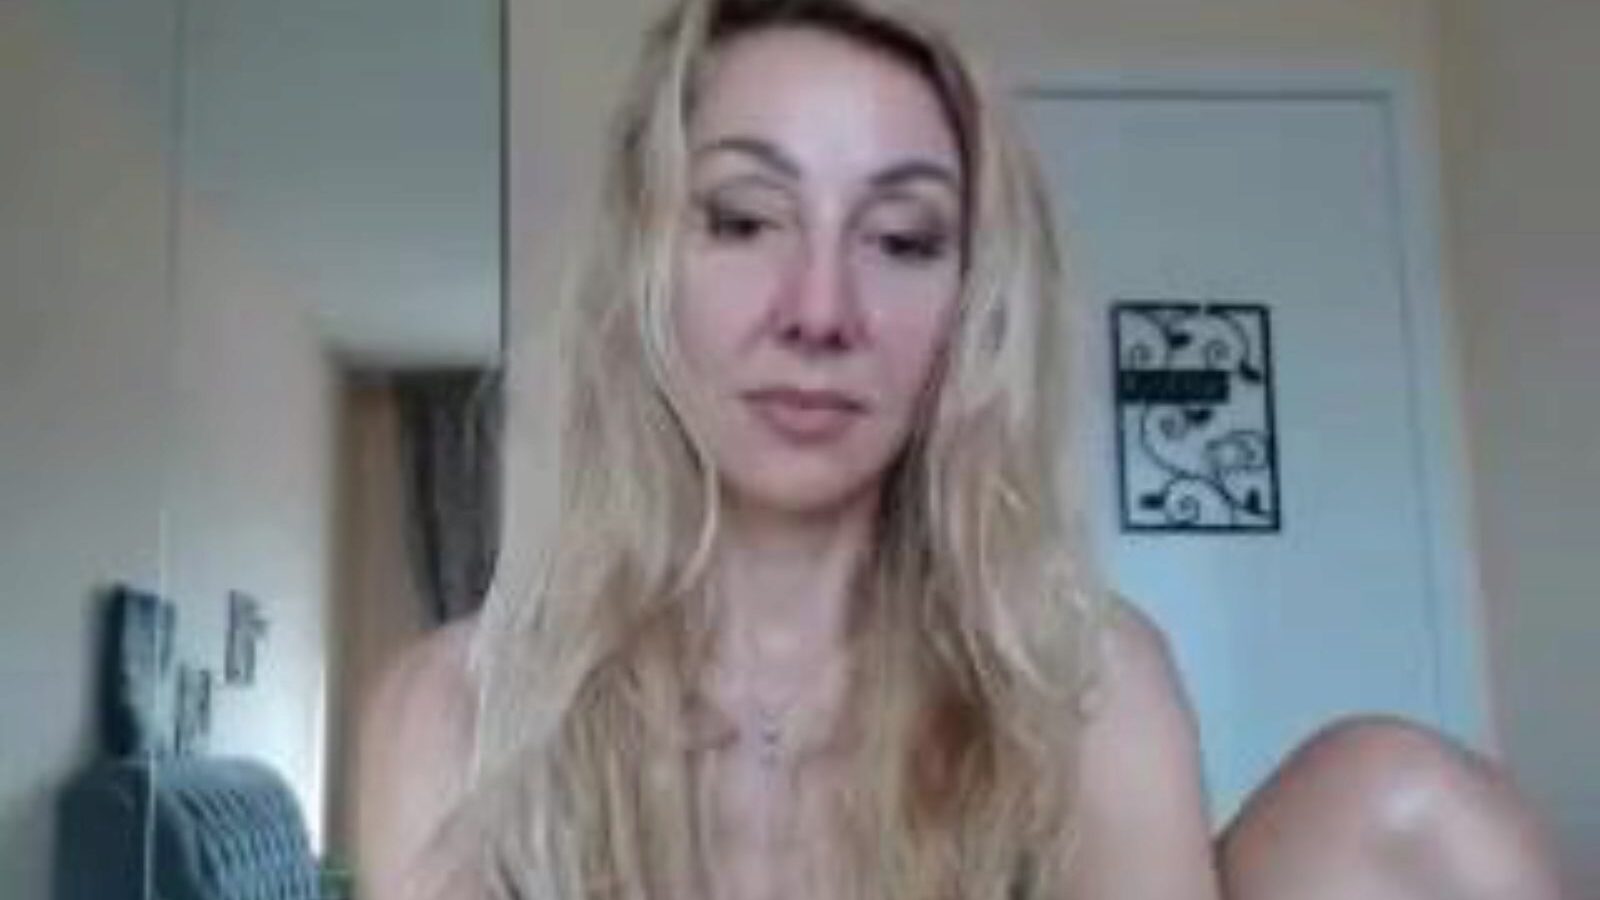 blonde mother passport like to drill having pleasure with a plenty of of toys blonde mother passport like to pound having enjoyment with a pile of playthings on livecam